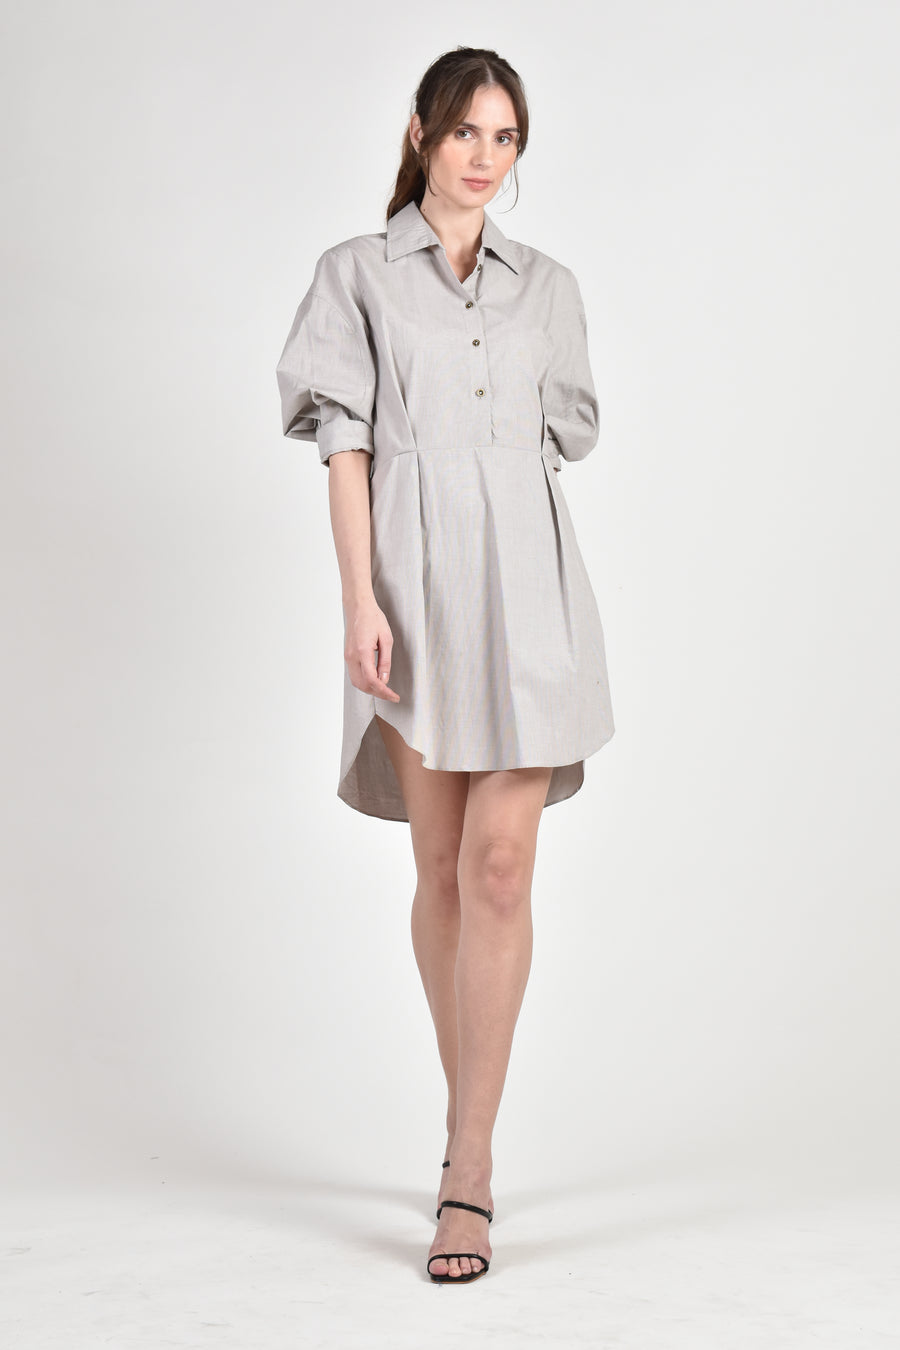 NEVILL Shirtdress with Pleat Detail (Nude)